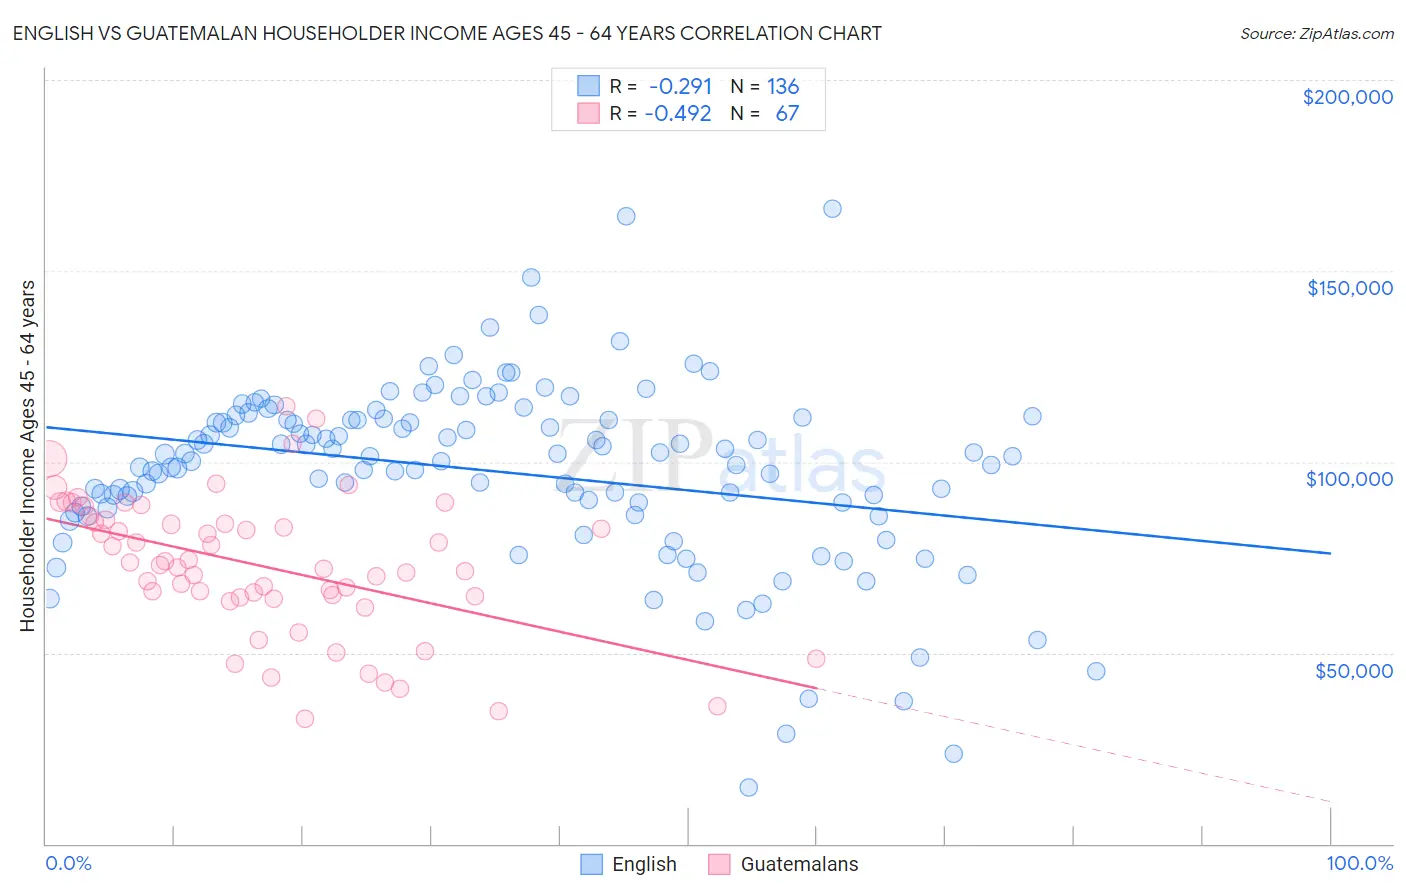 English vs Guatemalan Householder Income Ages 45 - 64 years